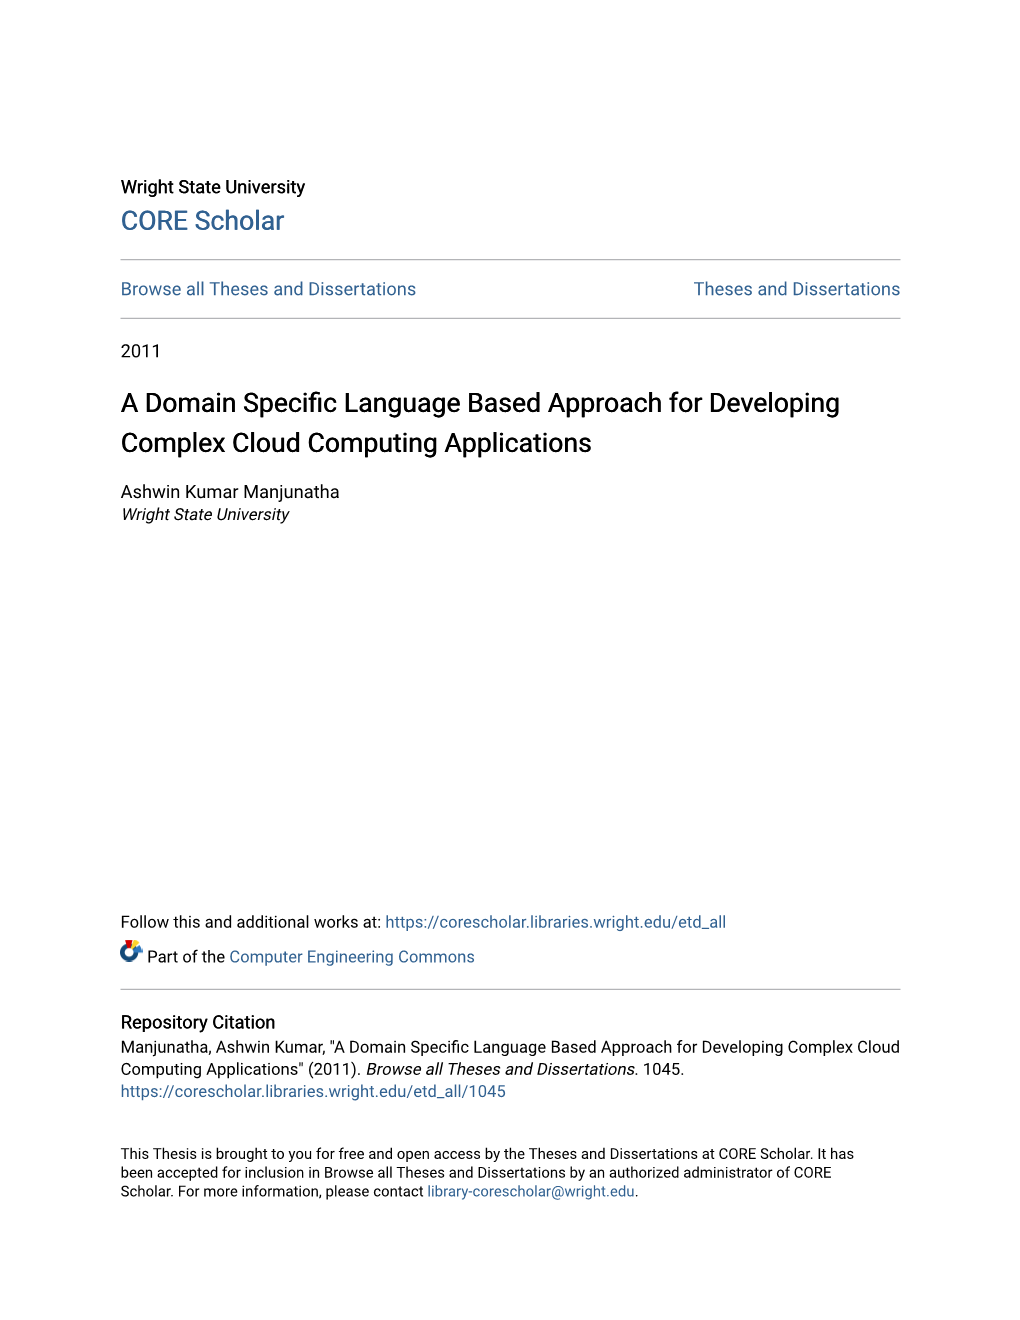 A Domain Specific Language Based Approach for Developing Complex Cloud Computing Applications